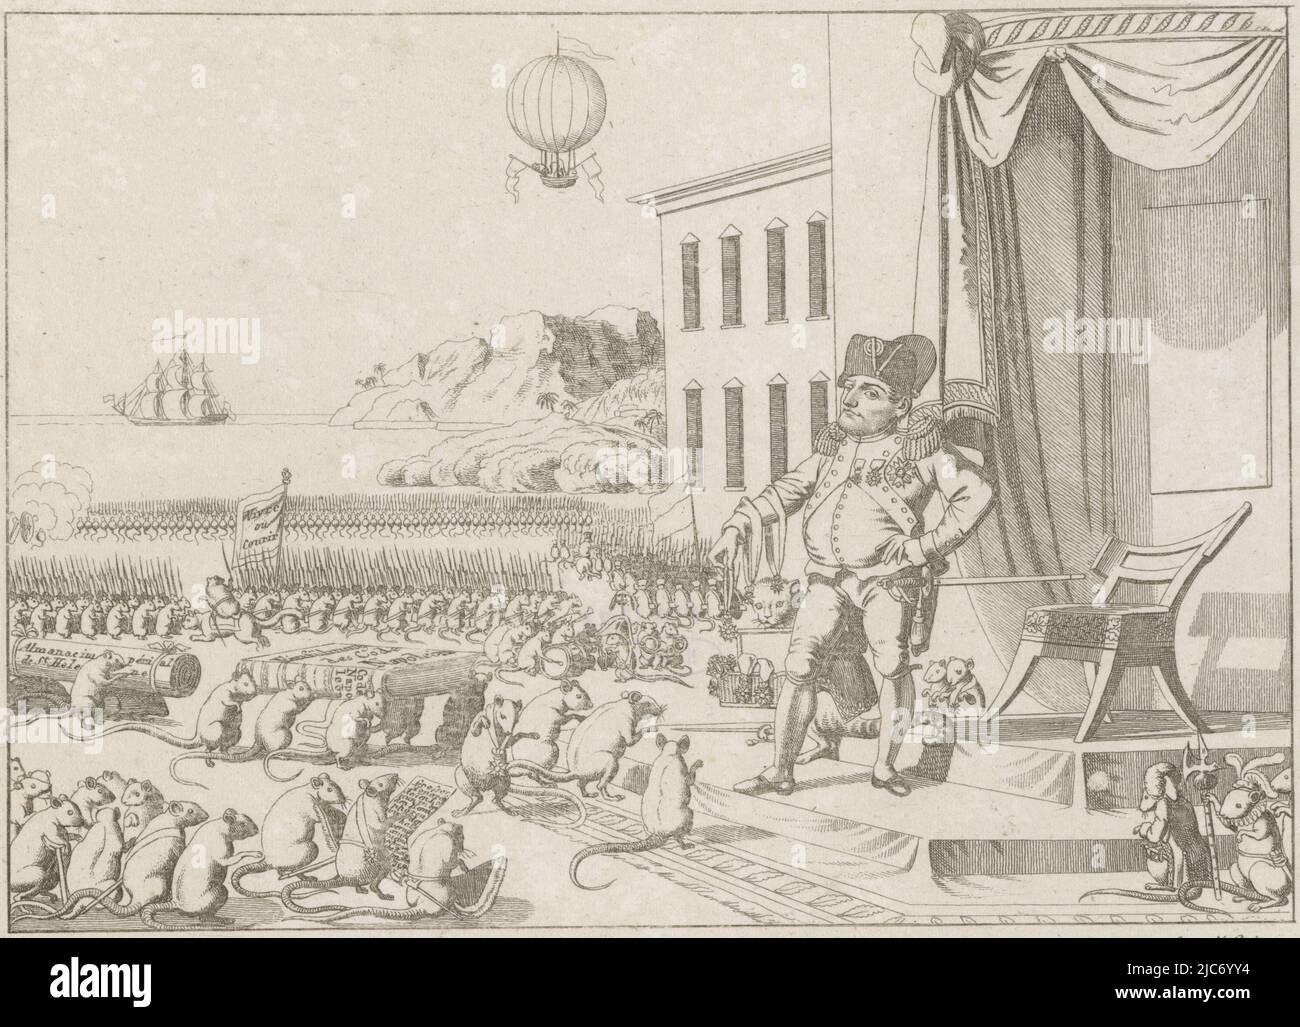 Cartoon in which the exiled Napoleon celebrates his birthday on St Helena, along with the rats. Napoleon standing before a people of rats honoring him as a monarch. Napoleon handing out medals to some rats. In the sky a hot air balloon, in the distance a blockade ship. On the occasion of Napoleon's banishment to St Helena in October 1815, Celebrating Napoleon's Birthday on St Helena, 1815 Wie der - dies Jahr in Europa nicht mehr gefeyerte - Napoleons-Tag auf der Insel St: Helena festlich begangen wird , print maker: Johann Michael Voltz, publisher: Friedrich Campe, print maker: Germany Stock Photo